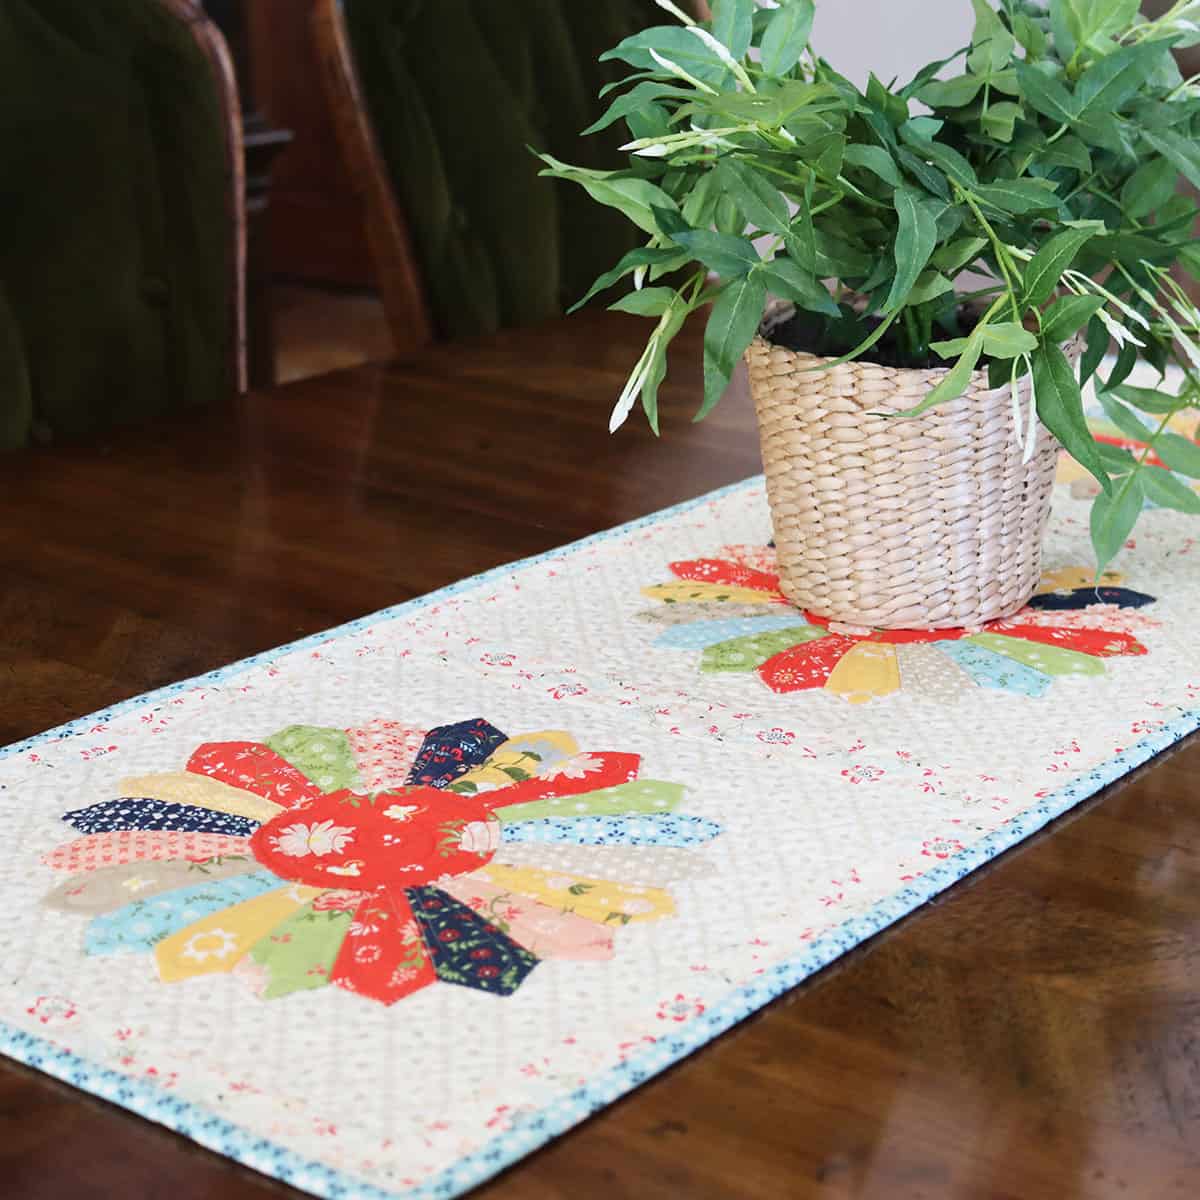 Scrappy Dresden Table Runner by Sherri from A Quilting Life